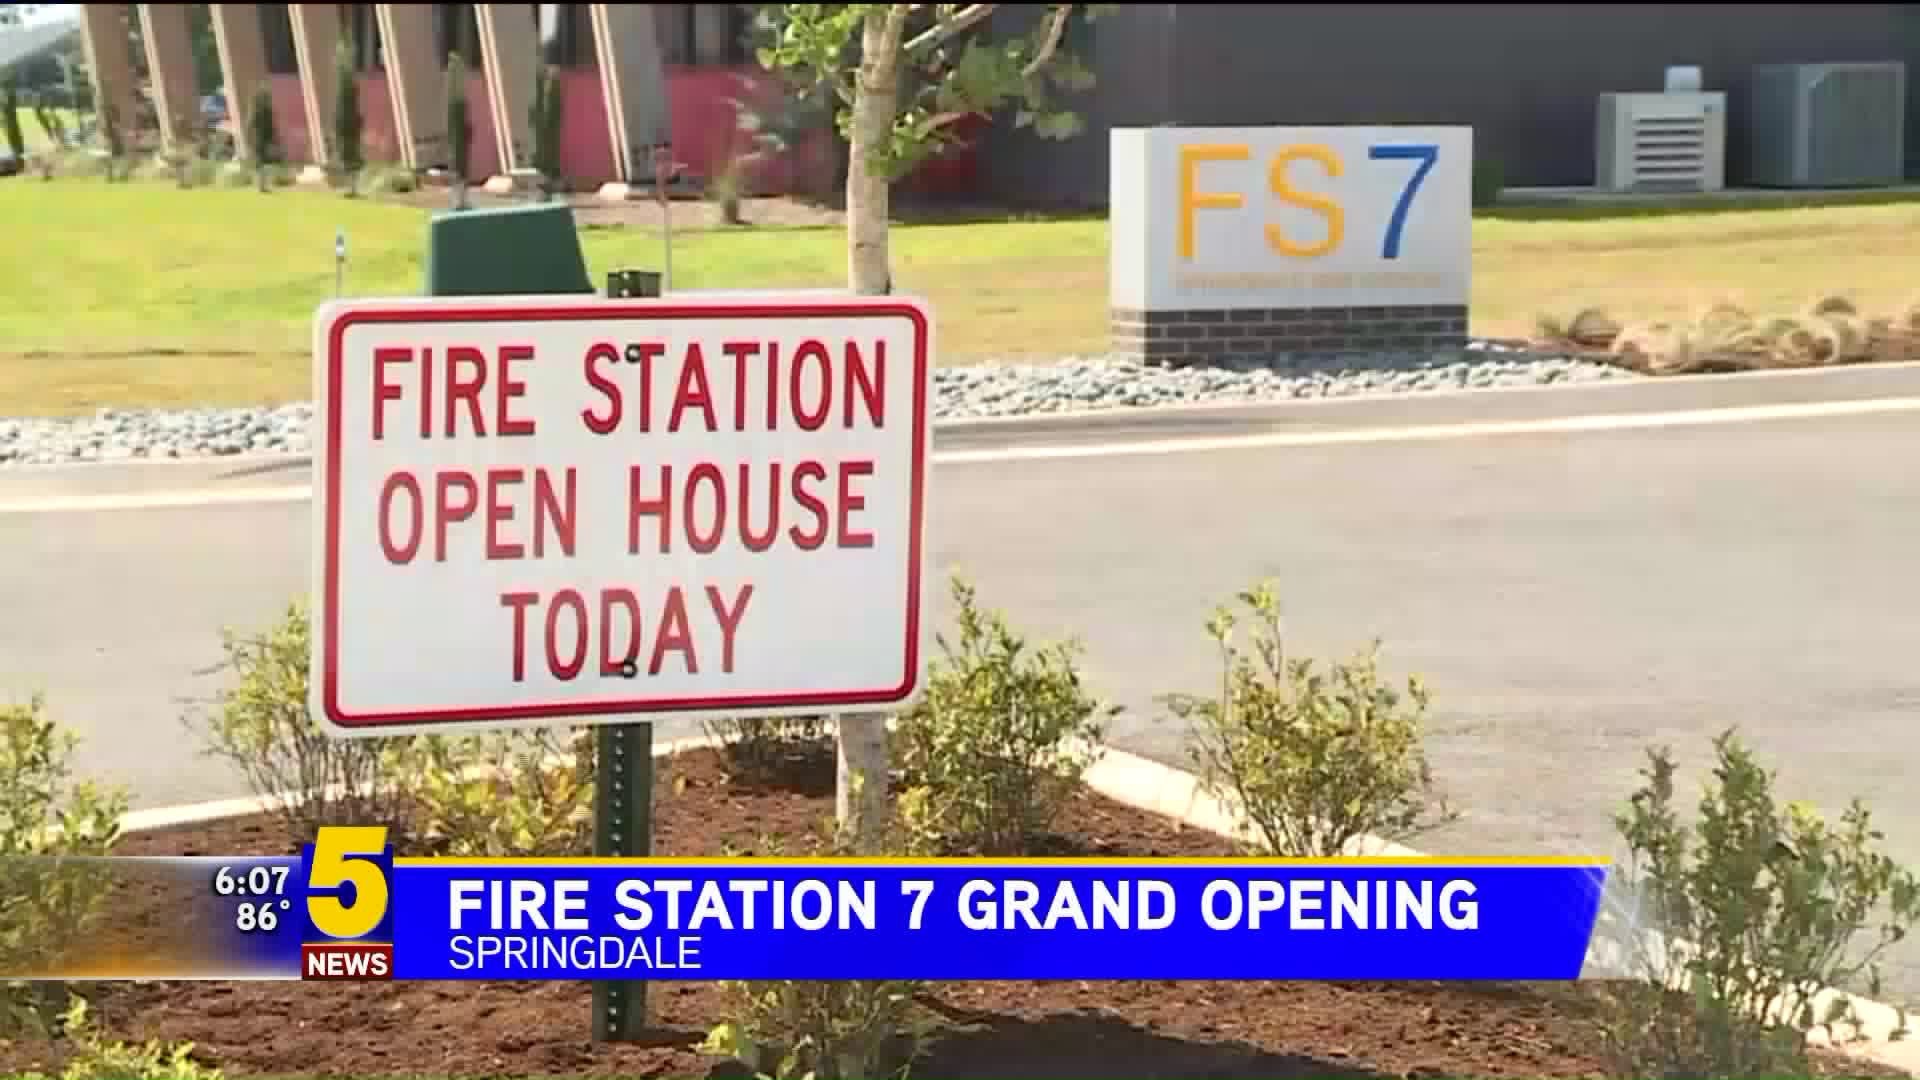 Fire Station 7 Grand Opening In Springdale